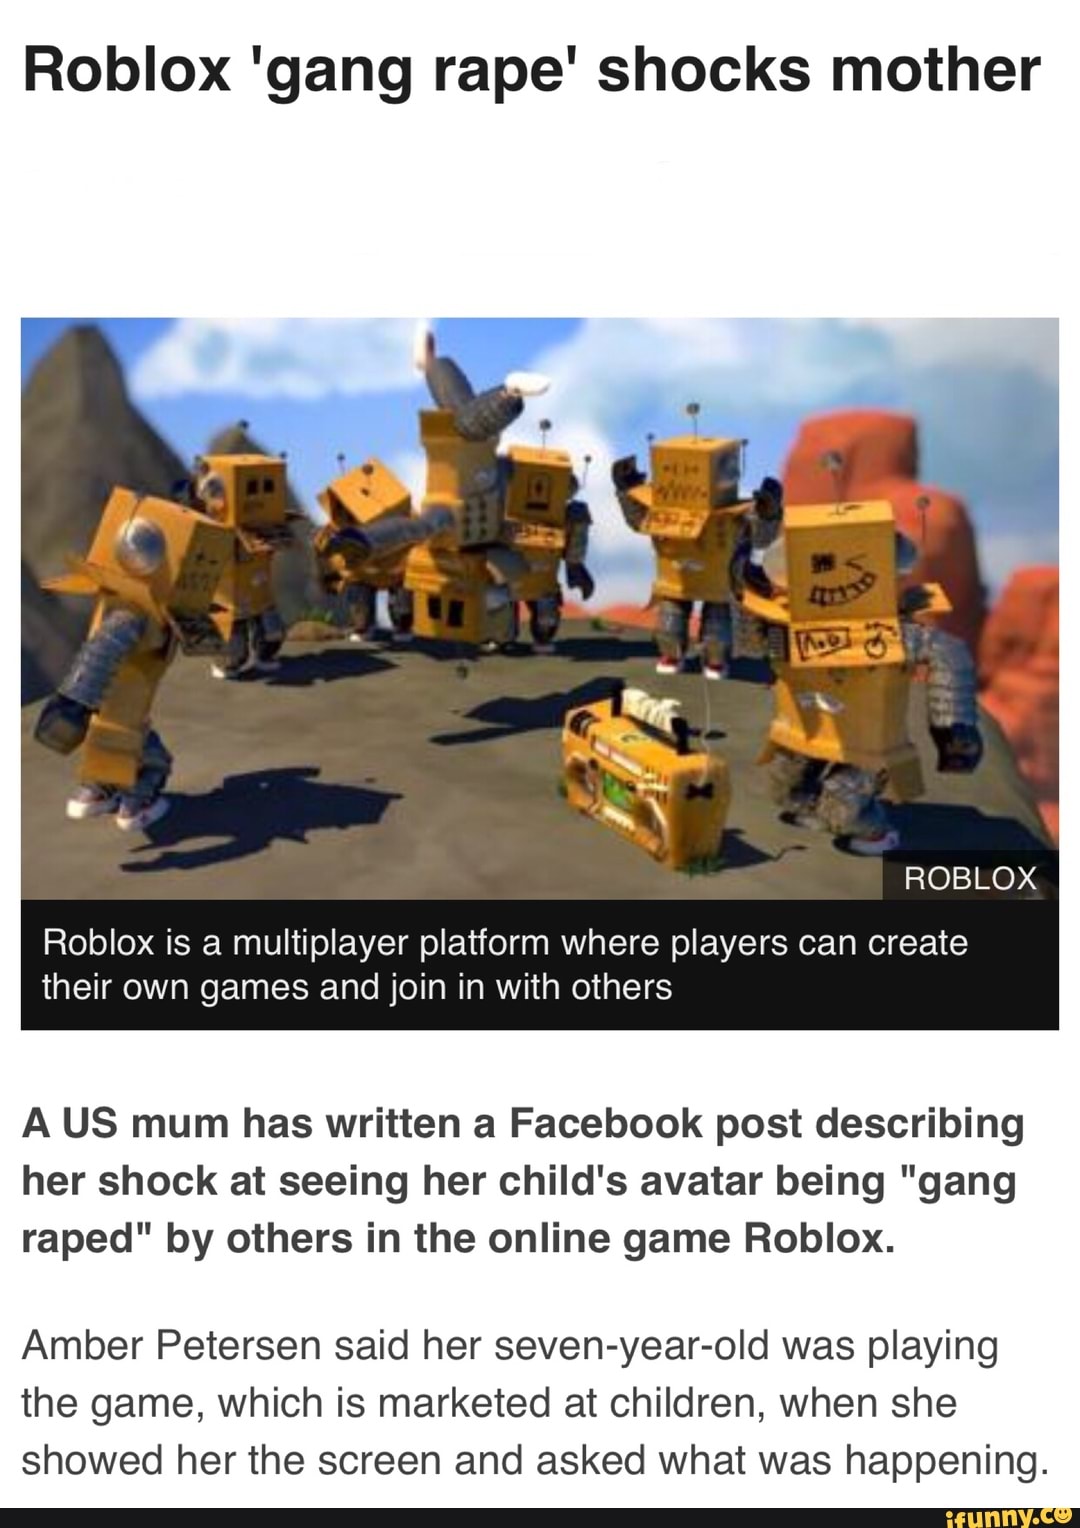 Roblox Gang Rape Shocks Mother Roblox Their Own Games And Join